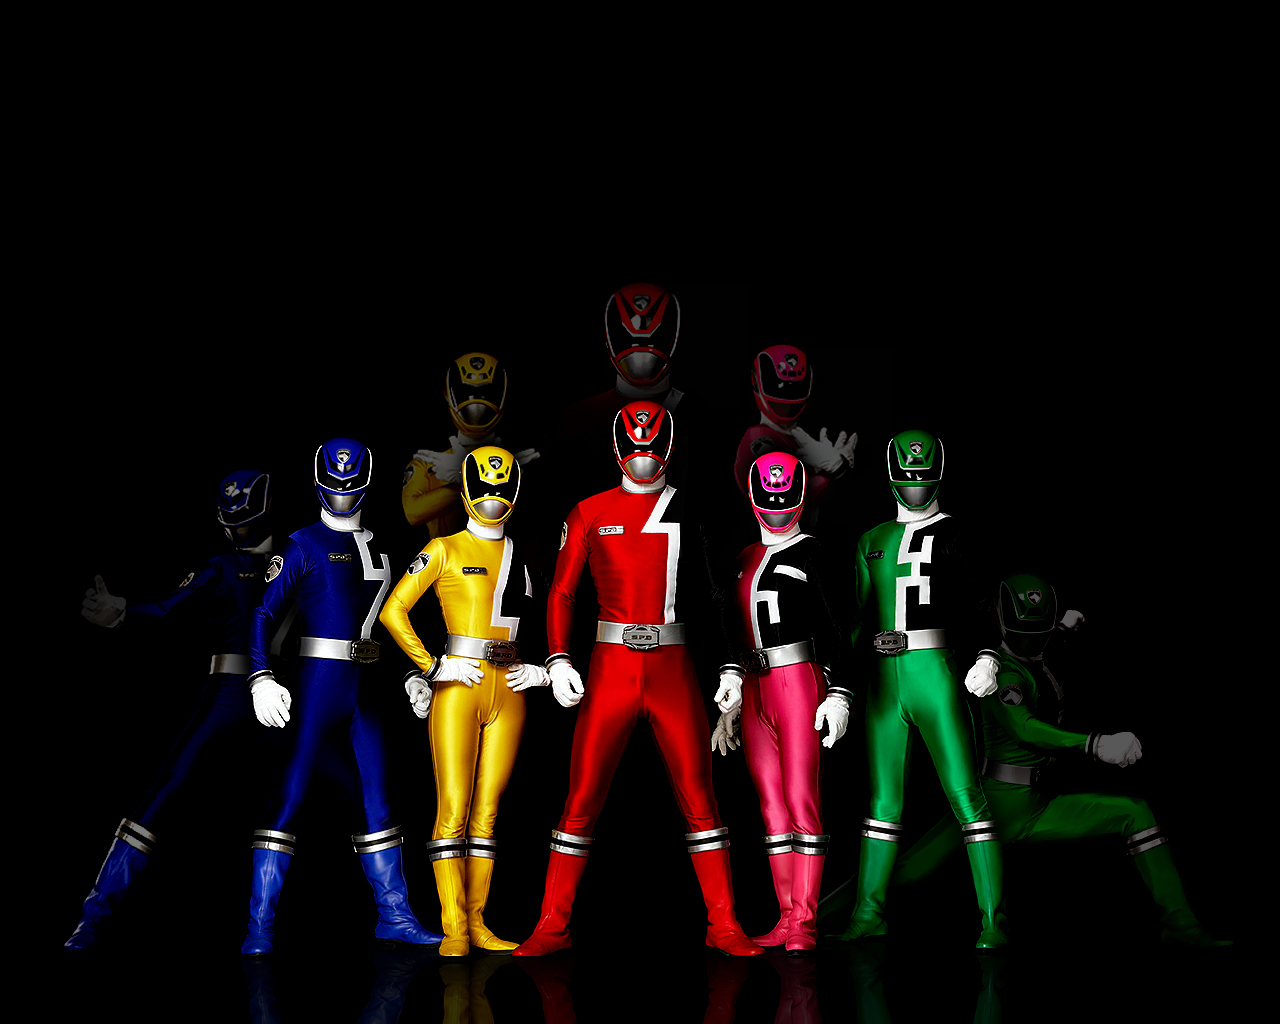 49 Power Rangers HD Wallpapers | Backgrounds - Wallpaper Abyss